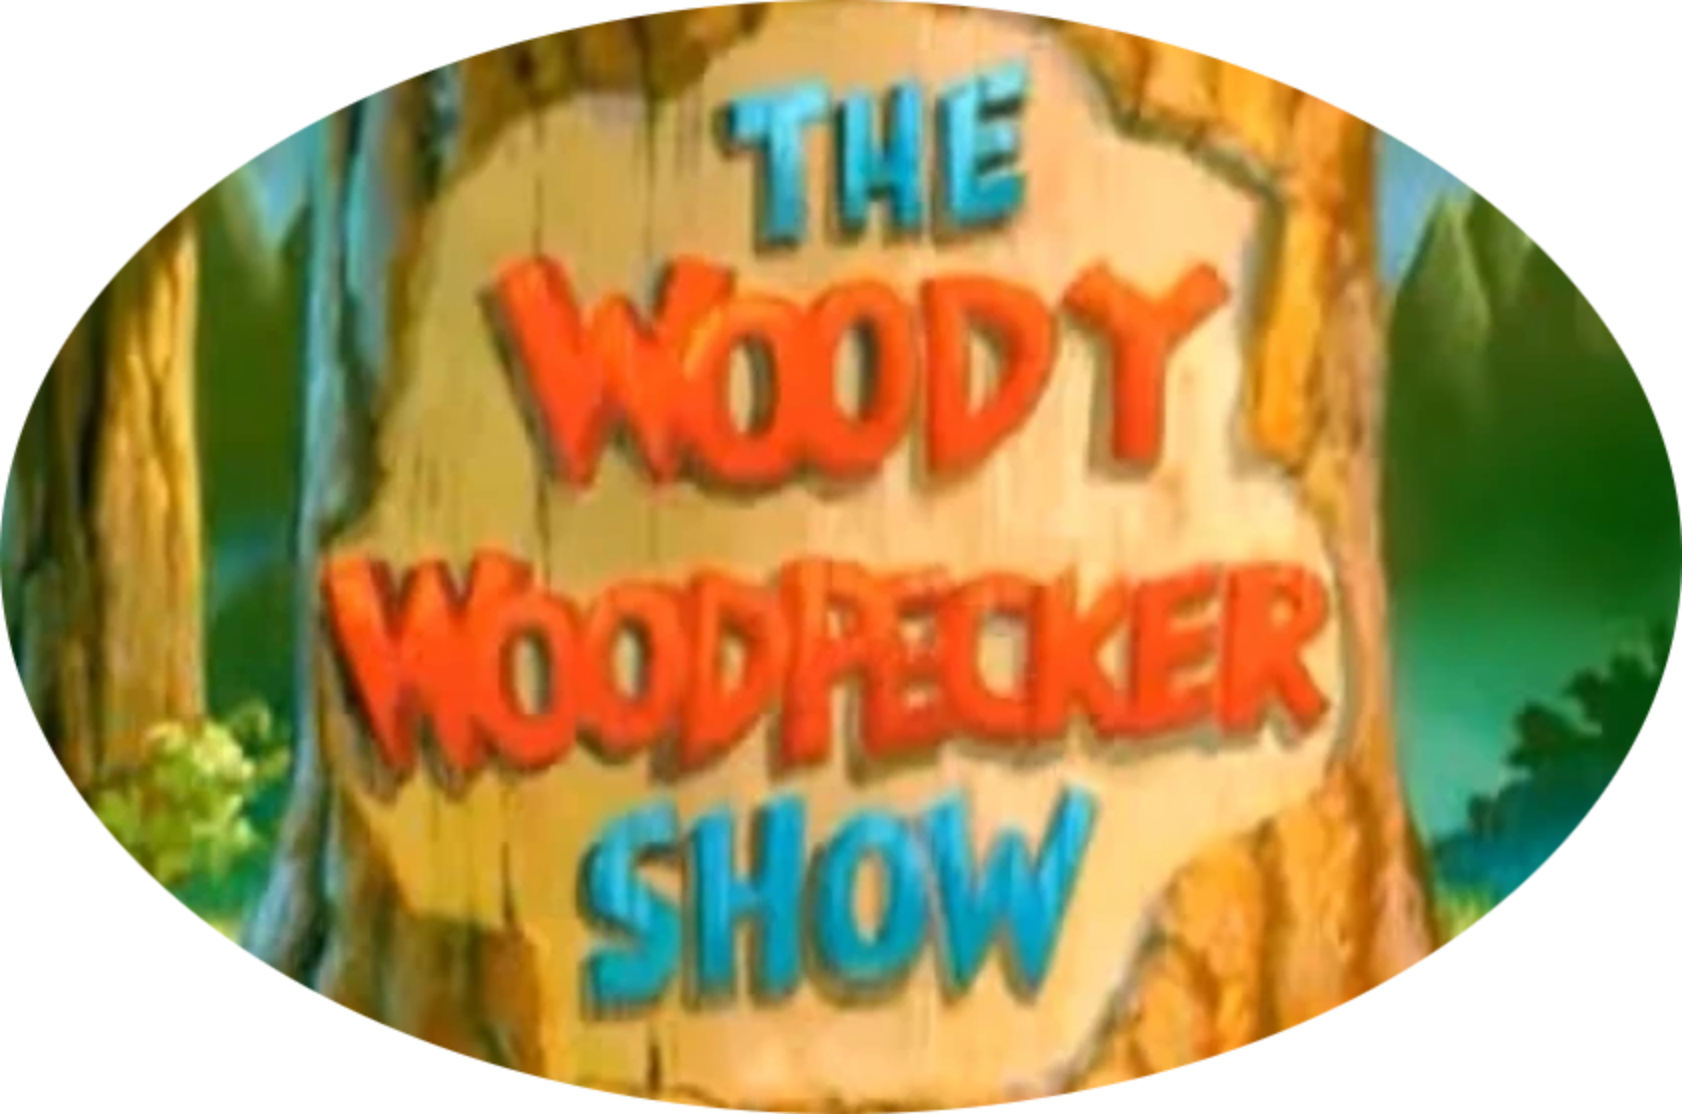 The New Woody Woodpecker Show Complete 